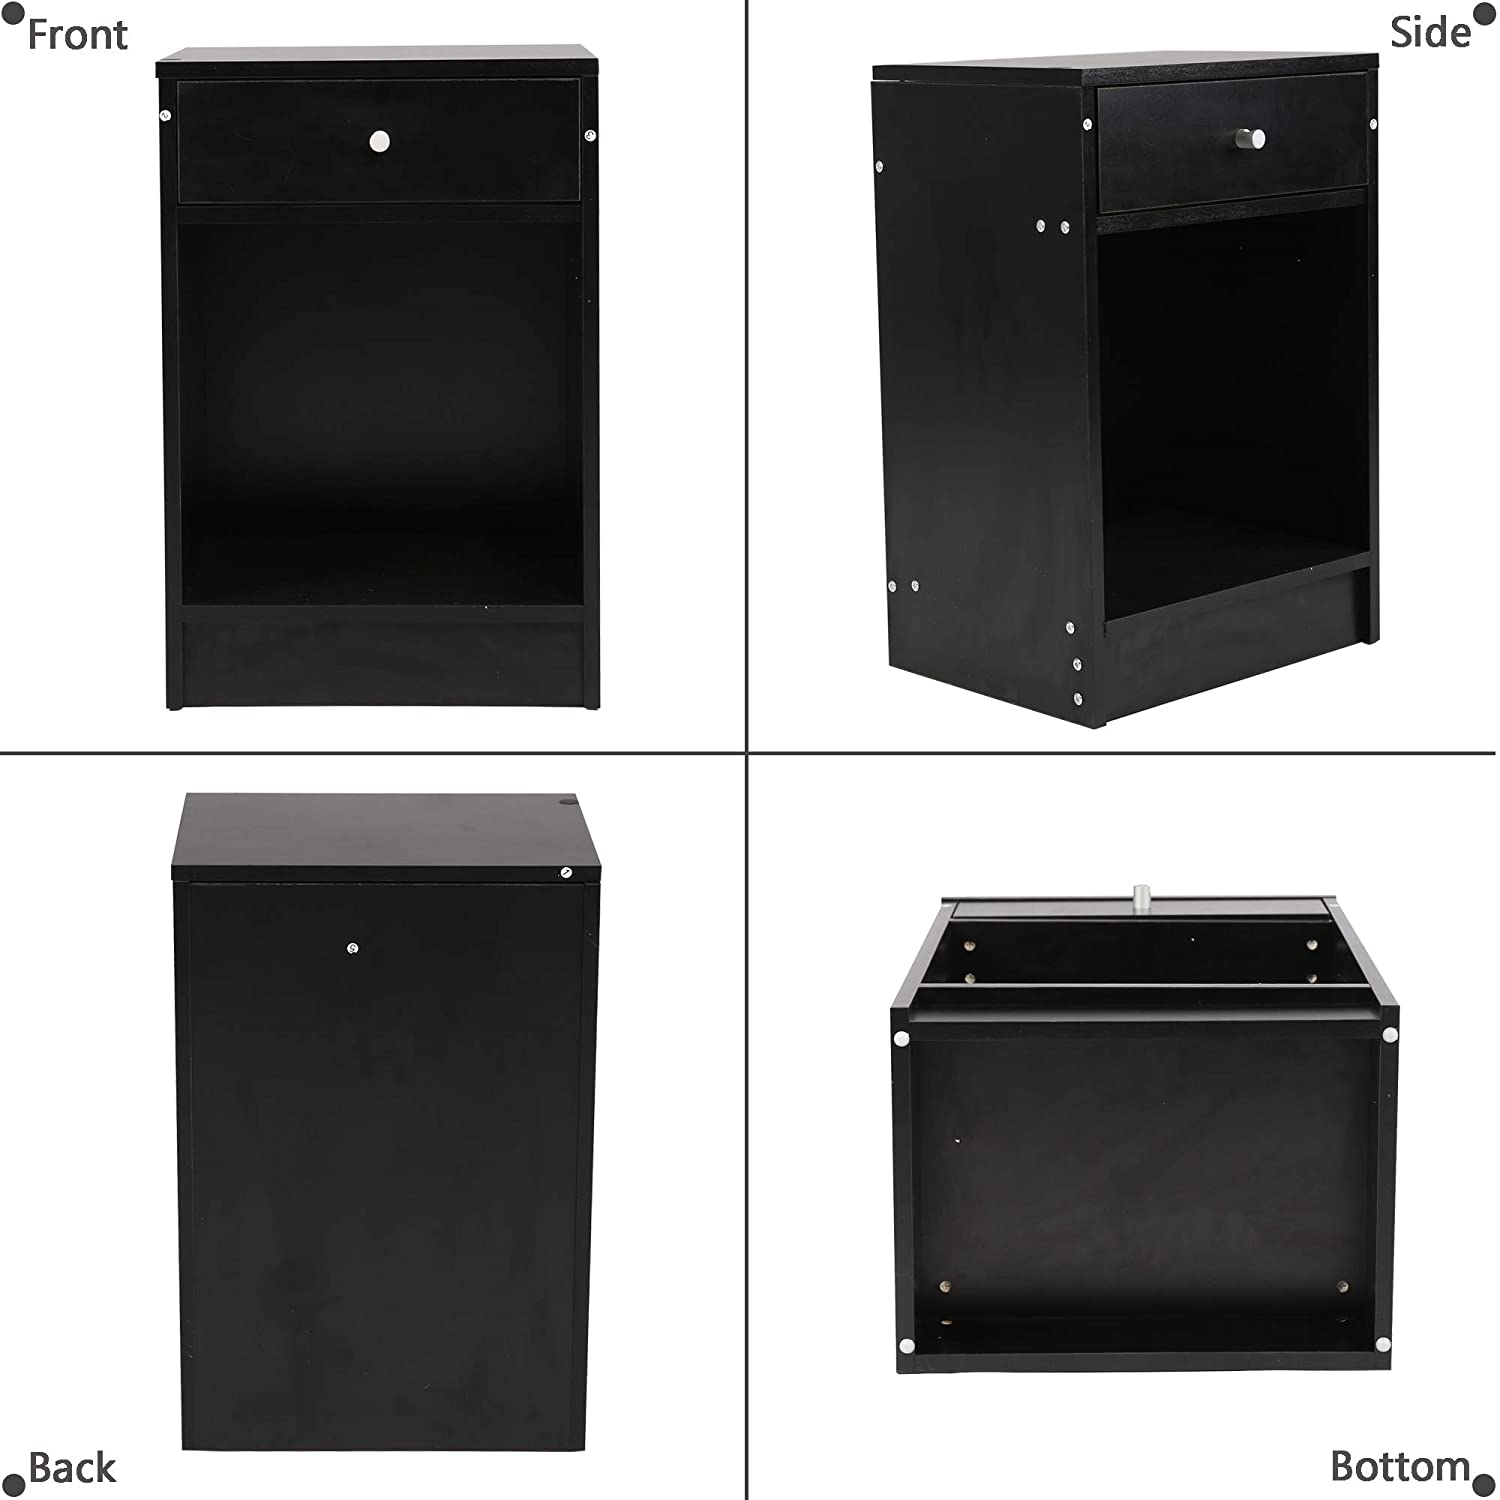 Black Nightstand End Table with Drawers Storage Shelf for Bedroom Living Room,Easy Assembly